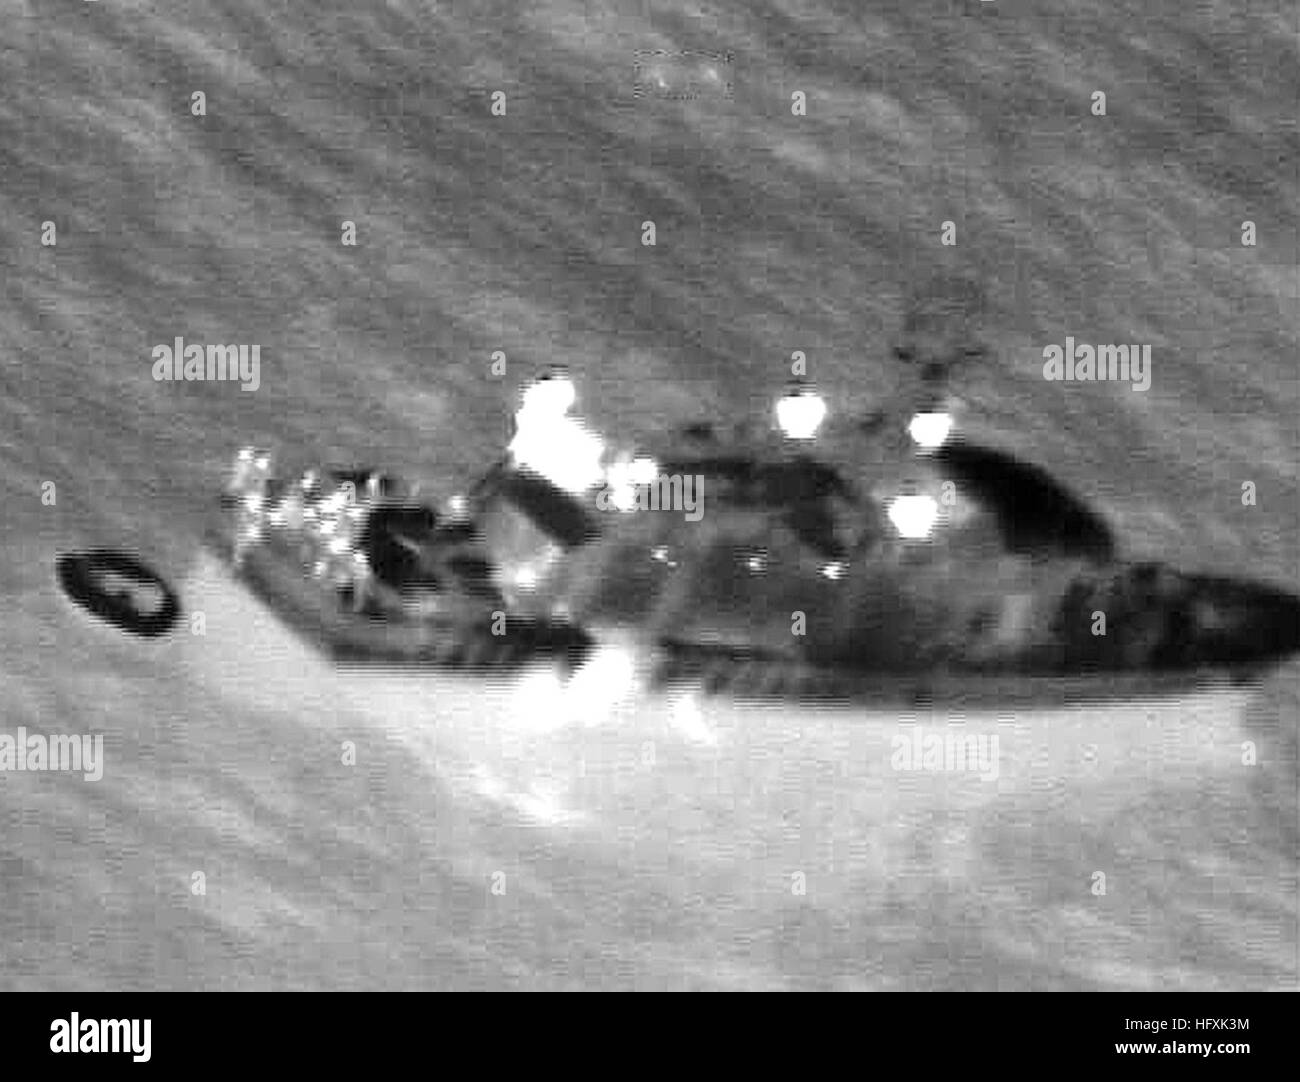 060204-N-0000N-003   RED SEA (Feb 4, 2006) - Infrared imagery taken from a U.S. Navy P-3C Orion maritime patrol aircraft, assisting in search and rescue operations for survivors of the Egyptian ferry Al Salam Boccaccio 98 in the Red Sea, shows a rescue vessel alongside a life raft.  The aircraft, assigned to the Golden Swordsmen of Patrol Squadron (VP-47), flew for almost 15 hours during the mission to assist local authorities in the search efforts.  VP-47 is homeported at Marine Corps Base Hawaii, Kaneohe Bay, and is currently supporting missions in the U.S. Central Command (USCENTCOM) area o Stock Photo